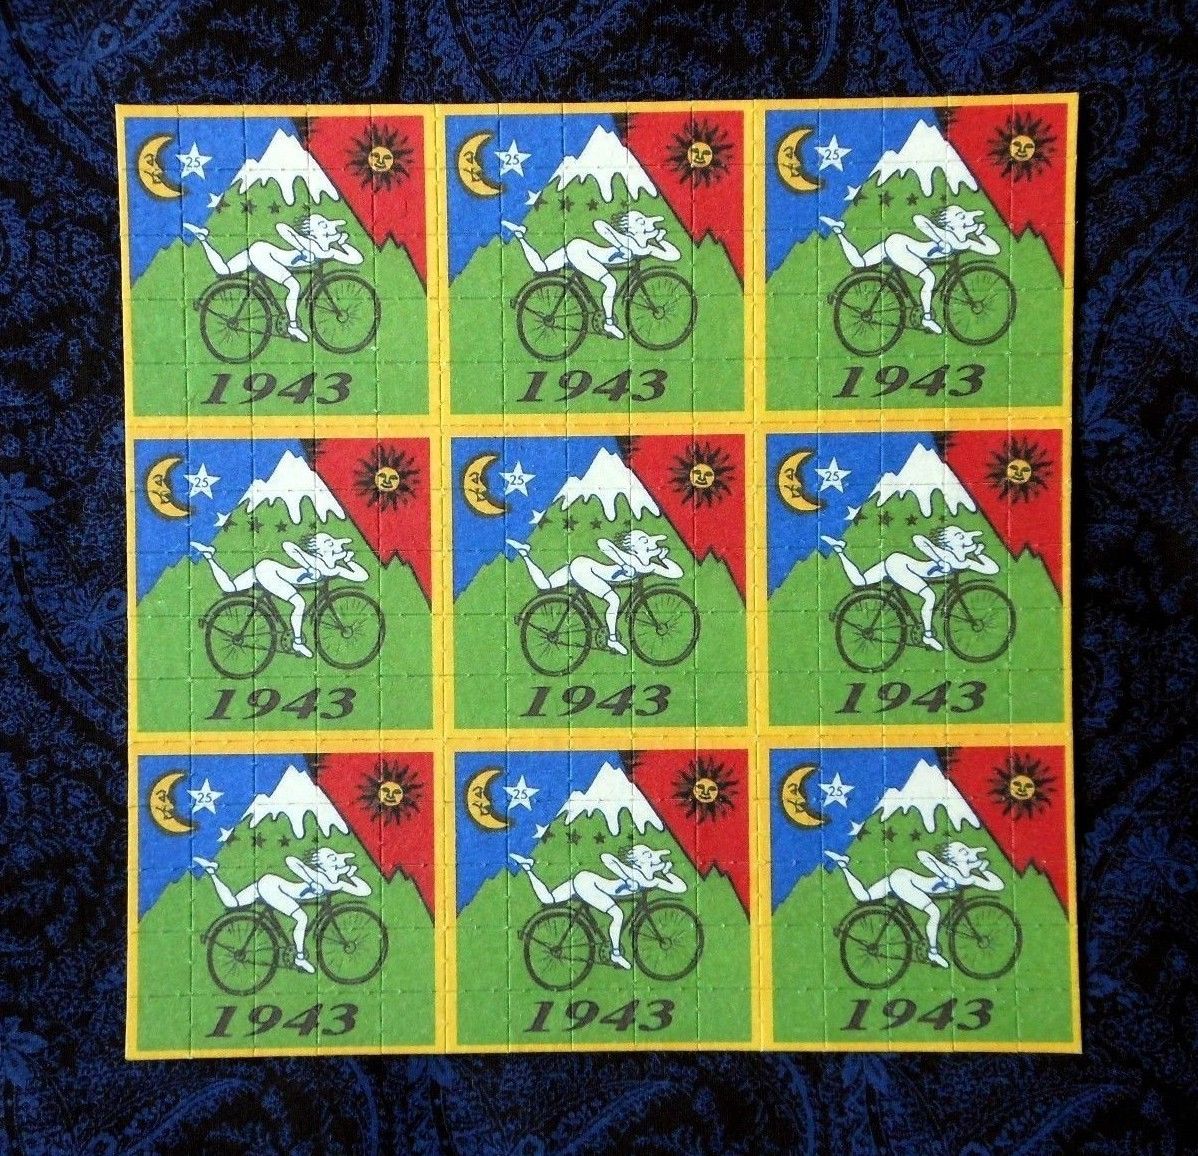 Blotter Art "Bicycle Day" Perforated Collection Paper Hoffman Bike Ride 1943